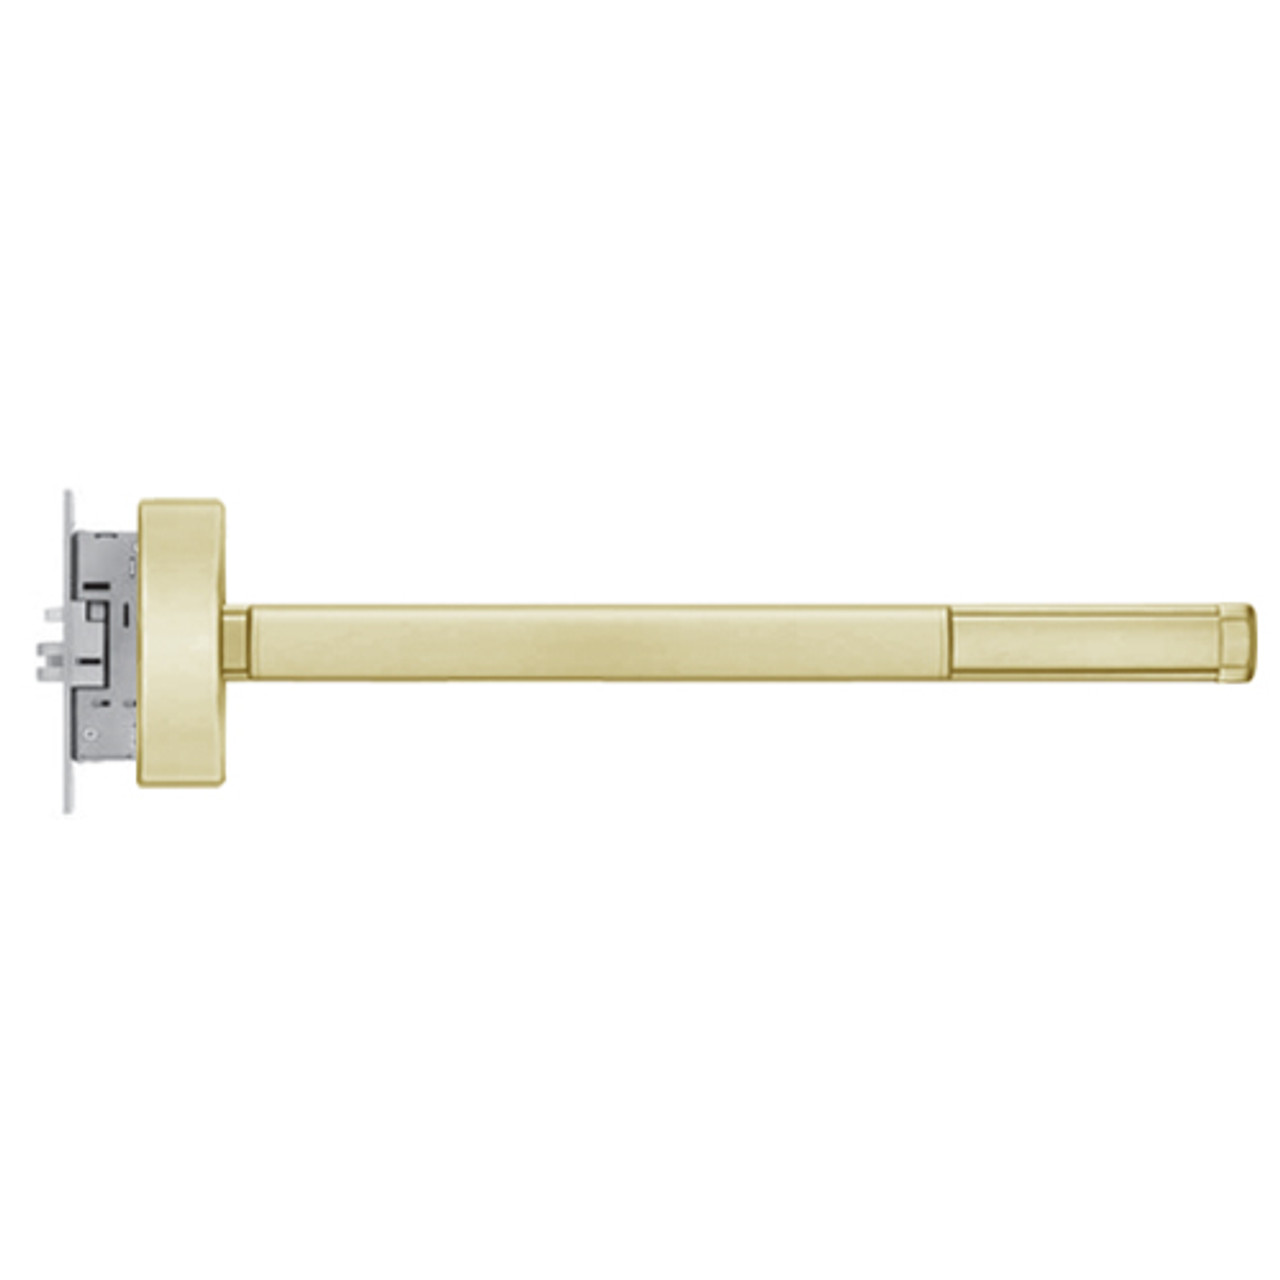 MLRFL2303-LHR-606-48 PHI 2300 Series Fire Rated Apex Mortise Exit Device with Motorized Latch Retraction Prepped for Key Retracts Latchbolt in Satin Brass Finish